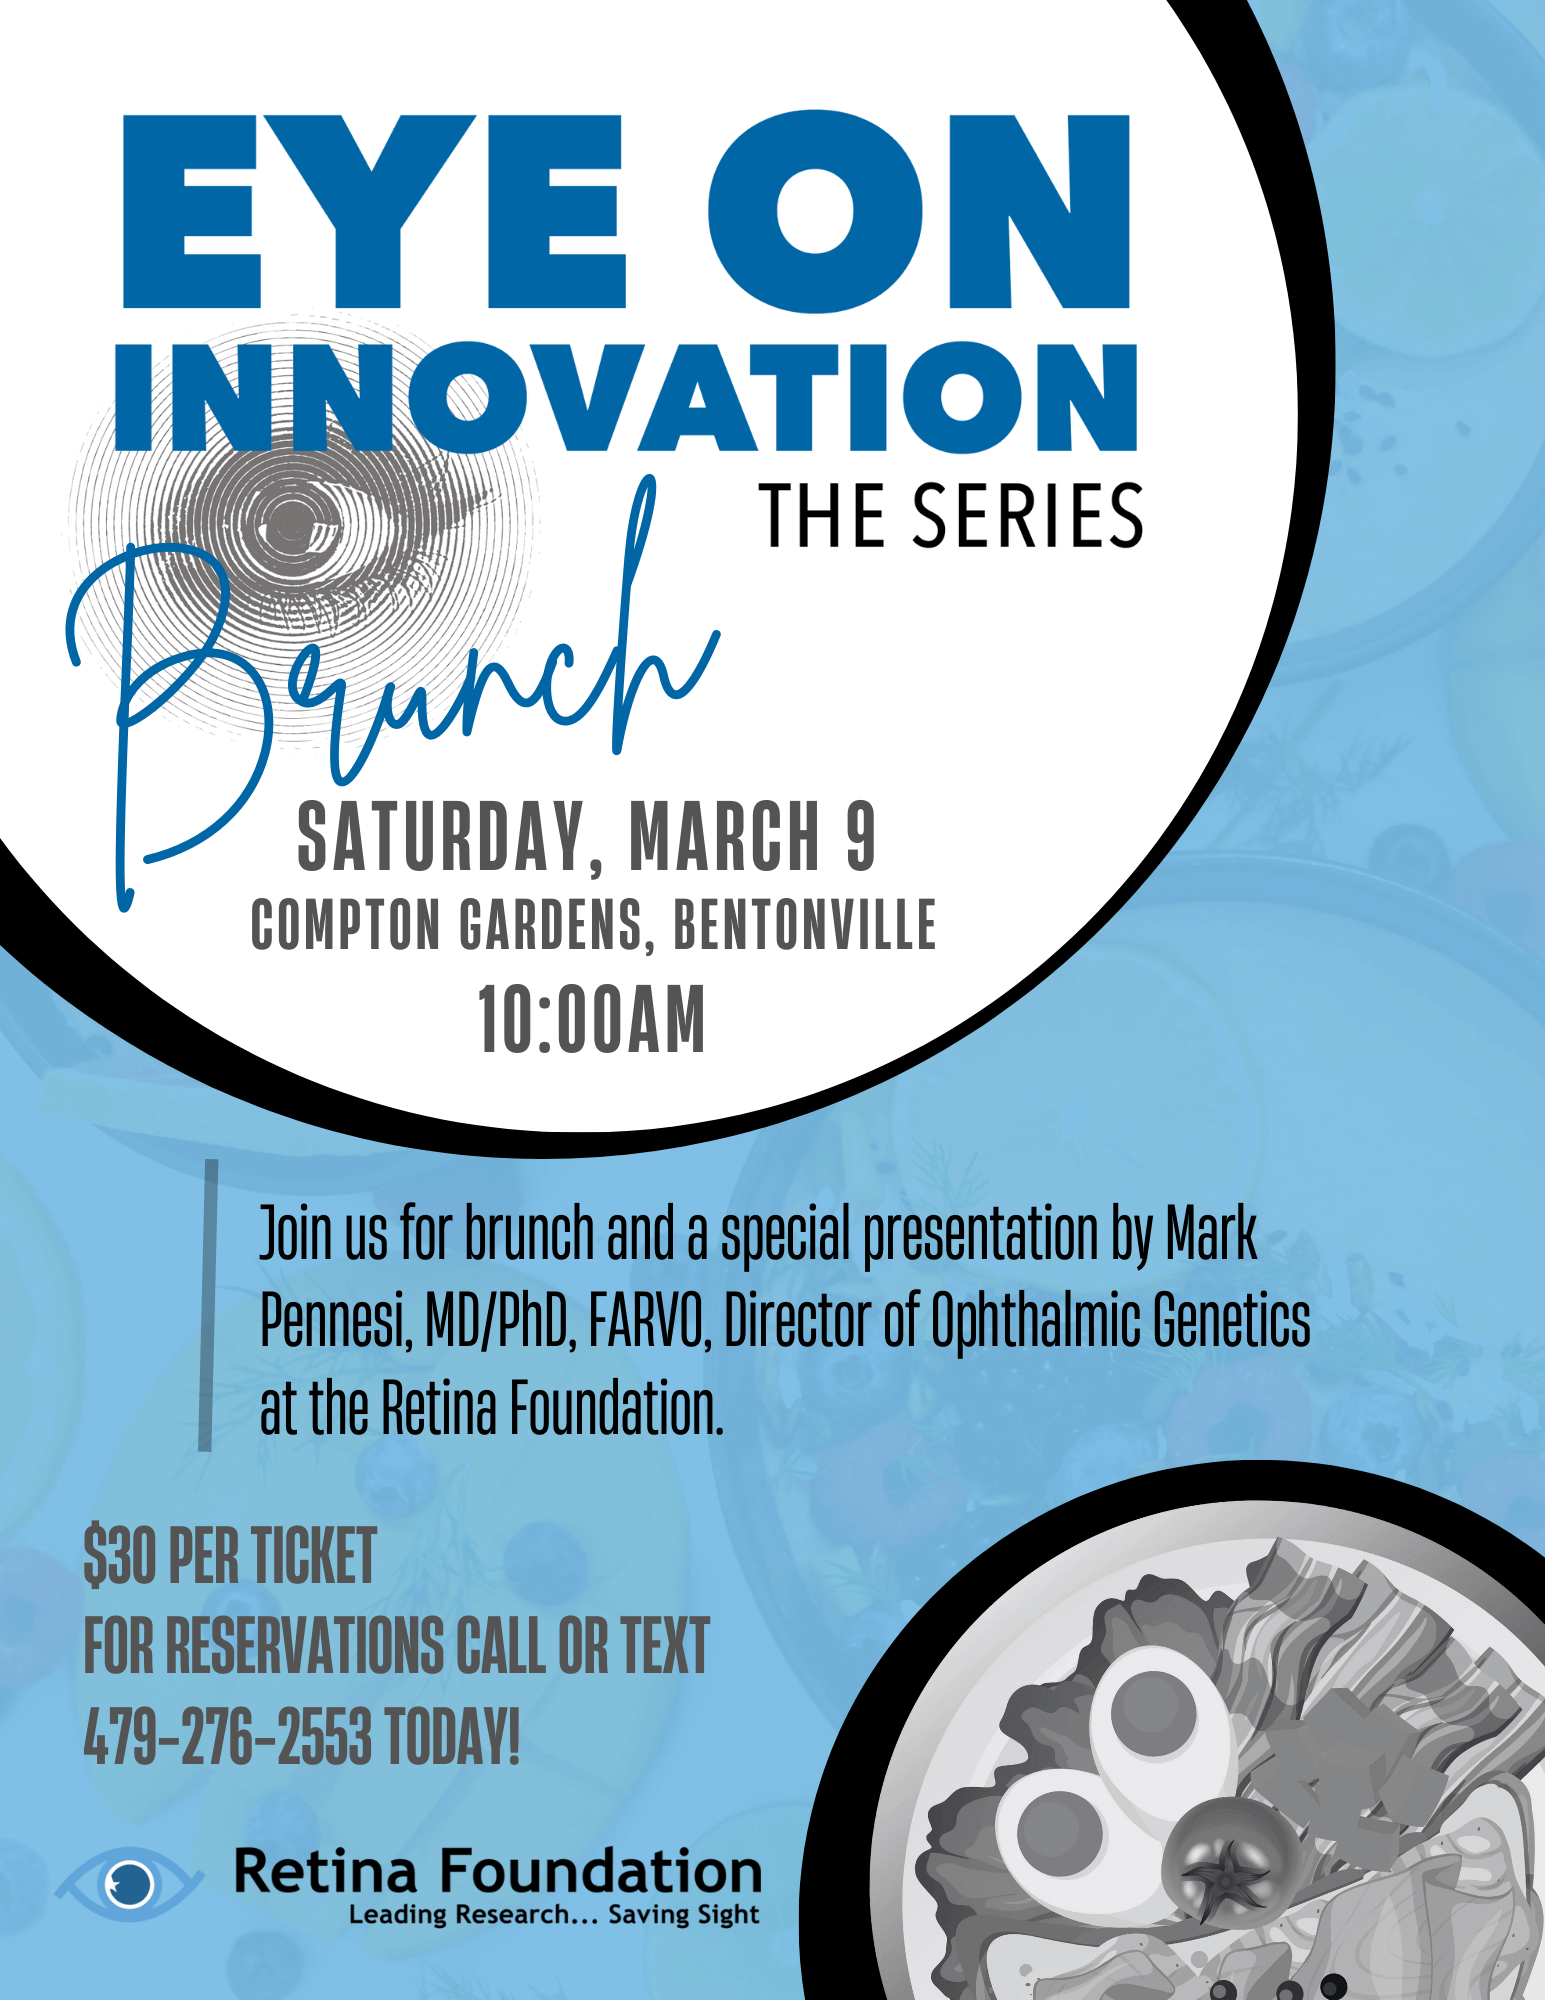 EYE ON INNOVATION THE SERIES Brunch SATURDAY, MARCH 9 COMPTON GARDENS, BENTONVILLE 10:00AM Join us for brunch and a special presentation by Mark Pennesi, MD/PhD, FARVO, Director of Ophthalmic Genetics at the Retina Foundation. $30 PER TICKET FOR RESERVATIONS CALL OR TEXT 479-276-2553 TODAY!